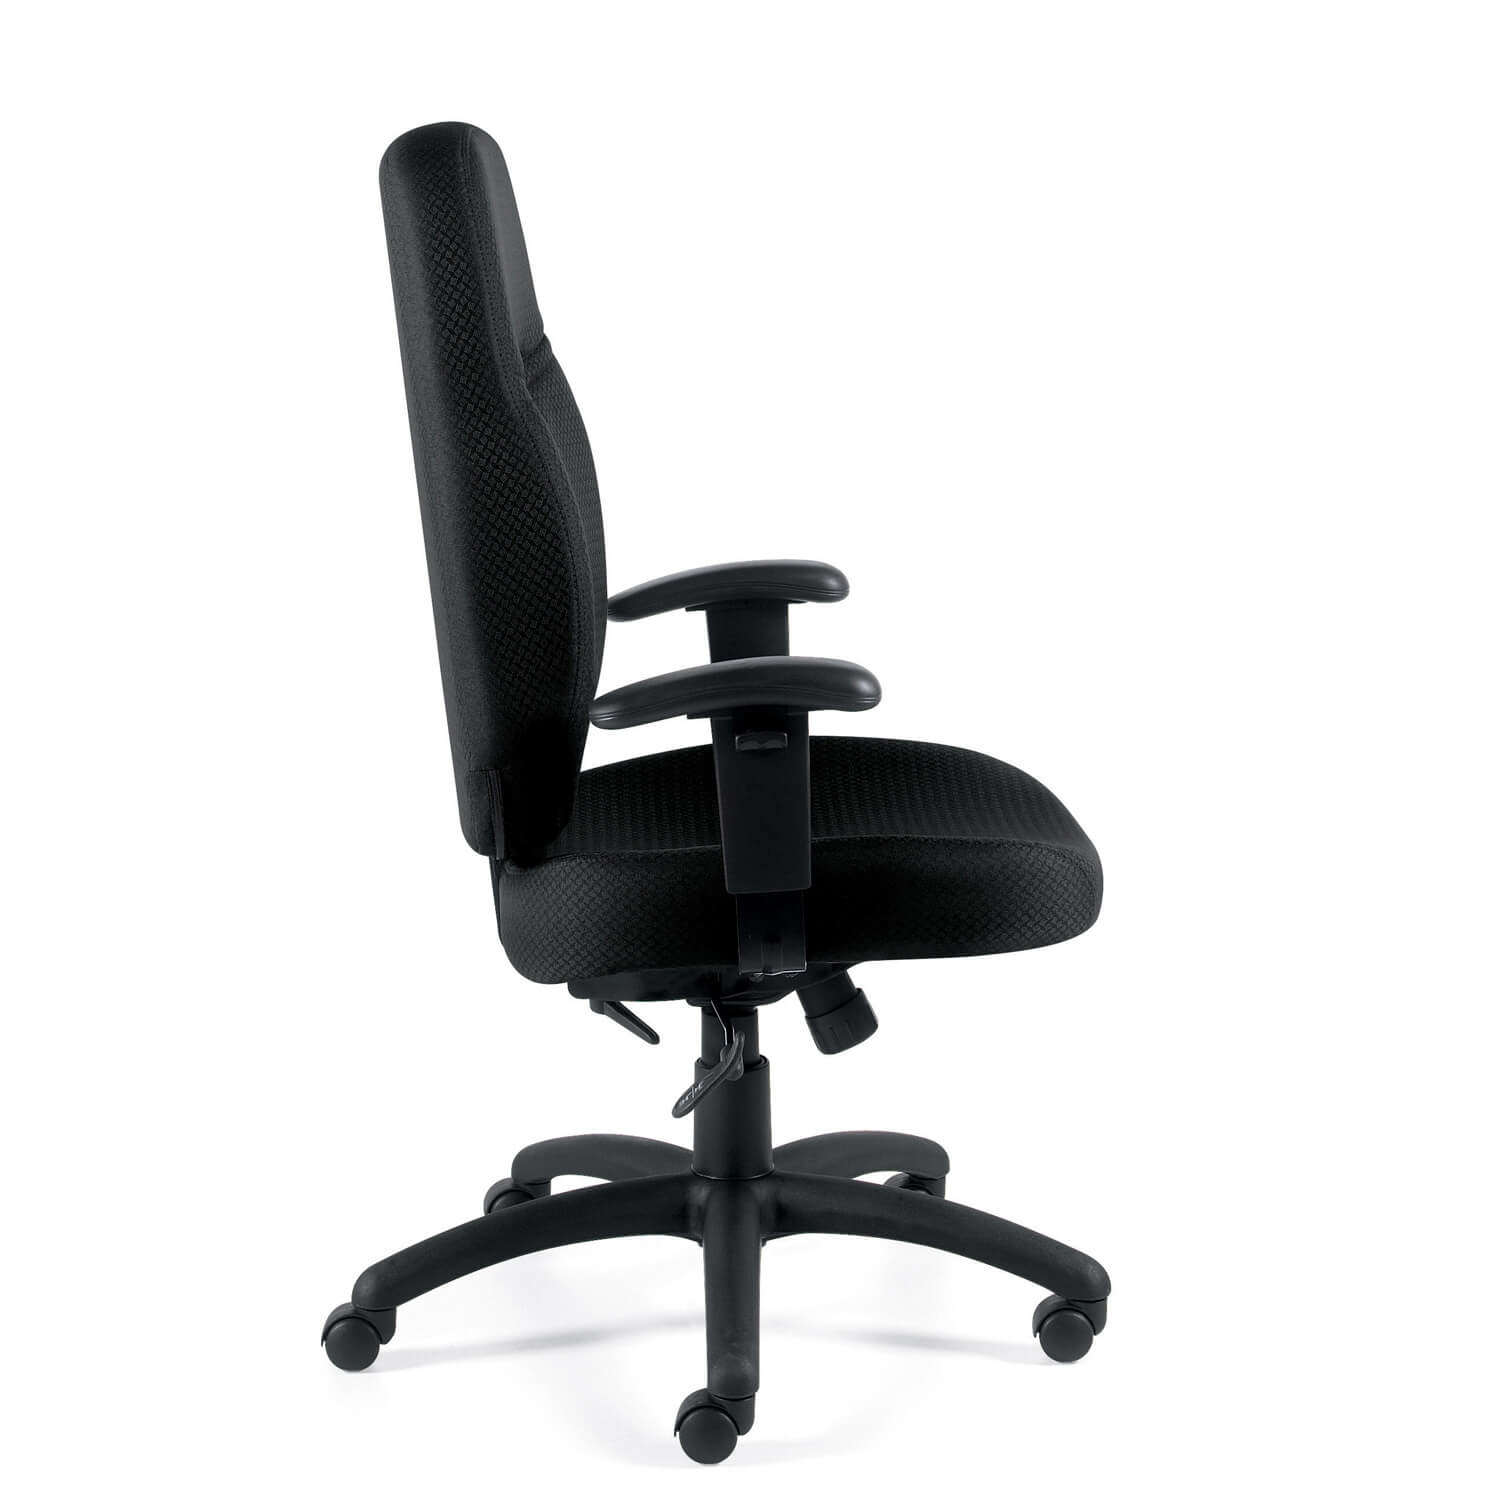 Adjustable office chair side view